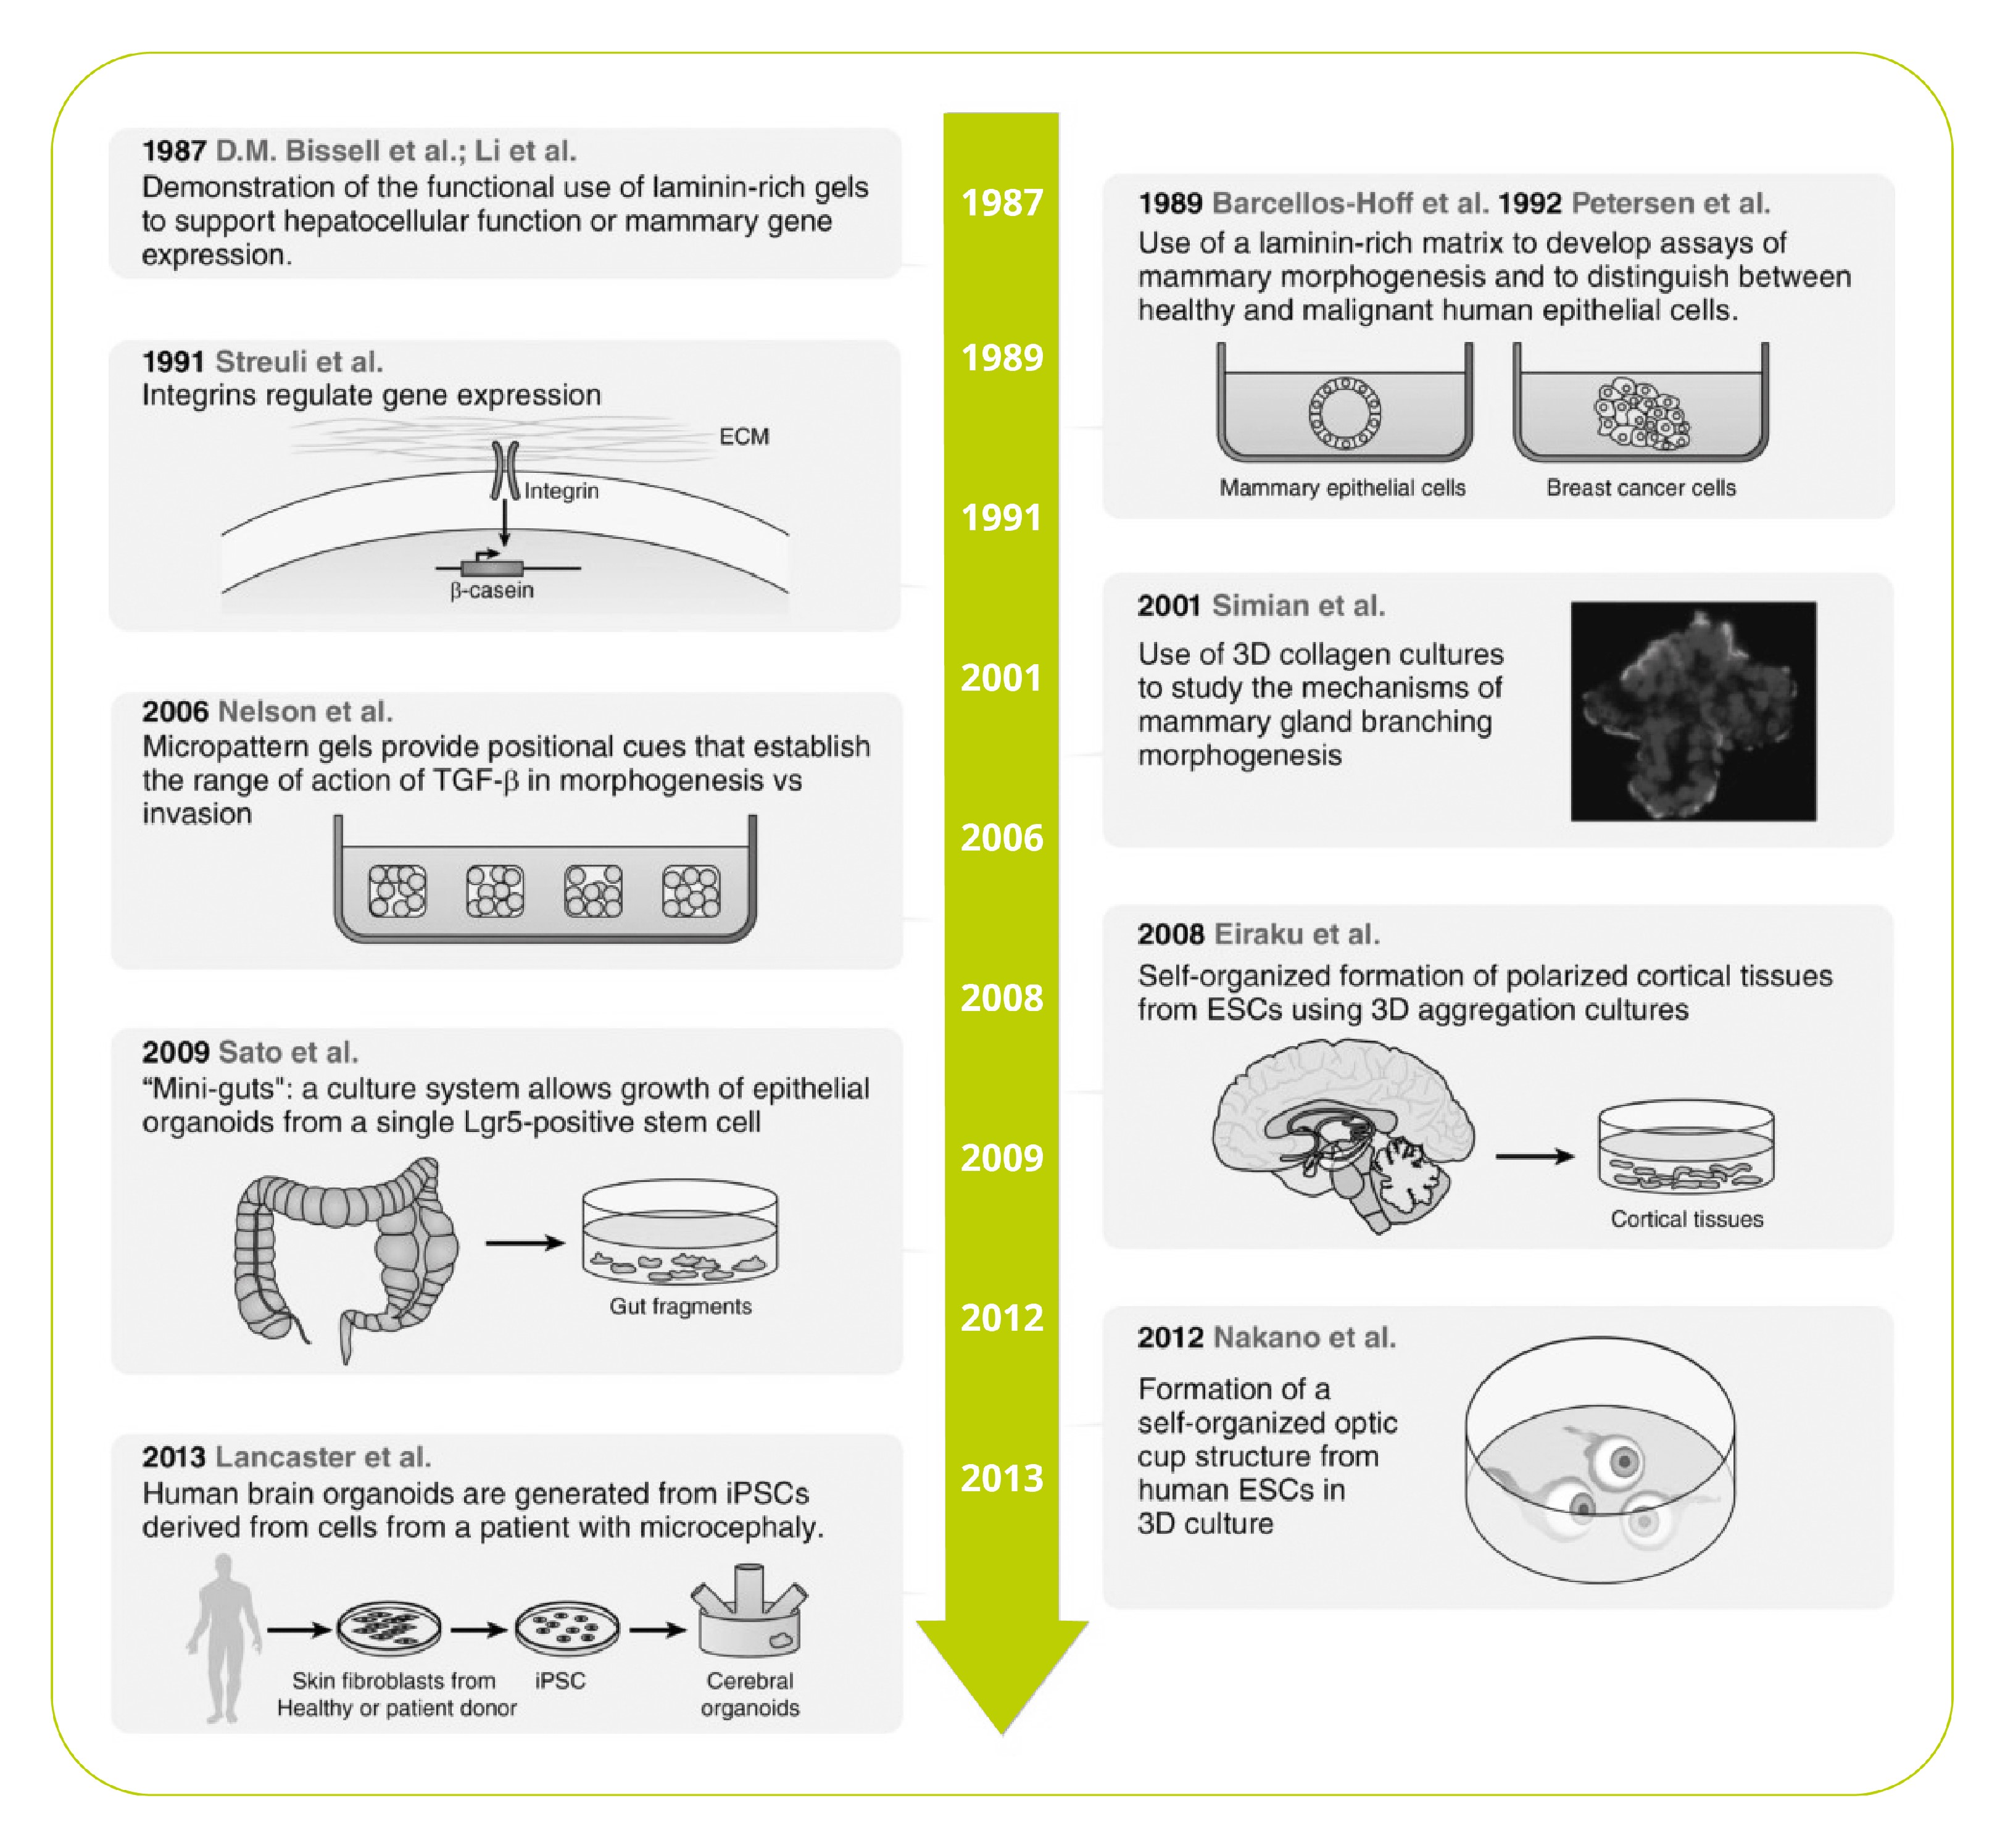 3D Cell Culture vs. Traditional 2D Cell Culture Explained